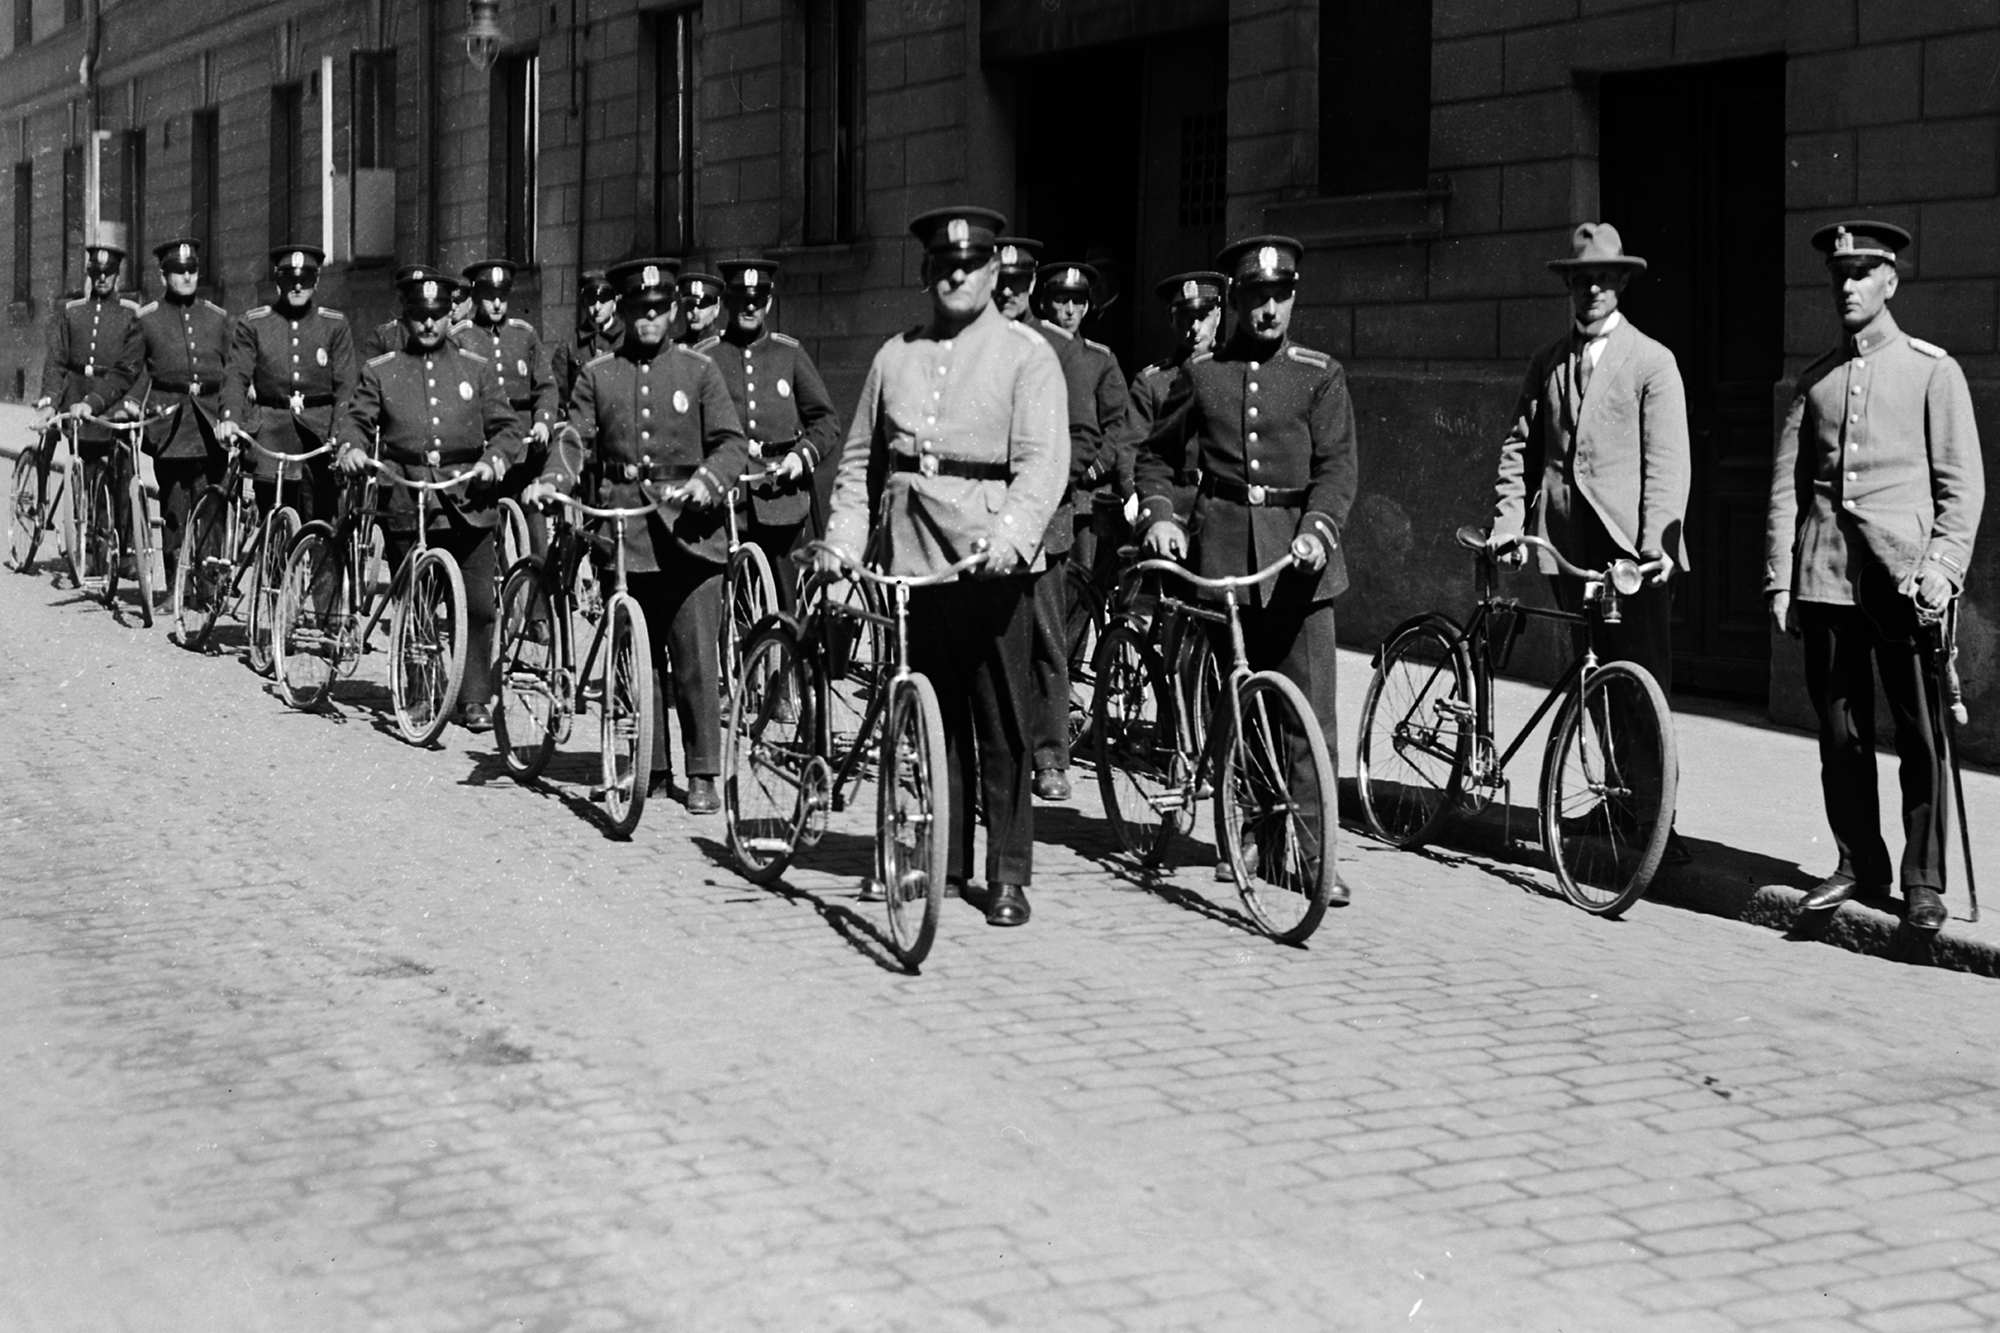 A black-and-white old photograph of uniformed police officers with bicycles. The policemen stand in two lines on a city street. Photo The Police Museum